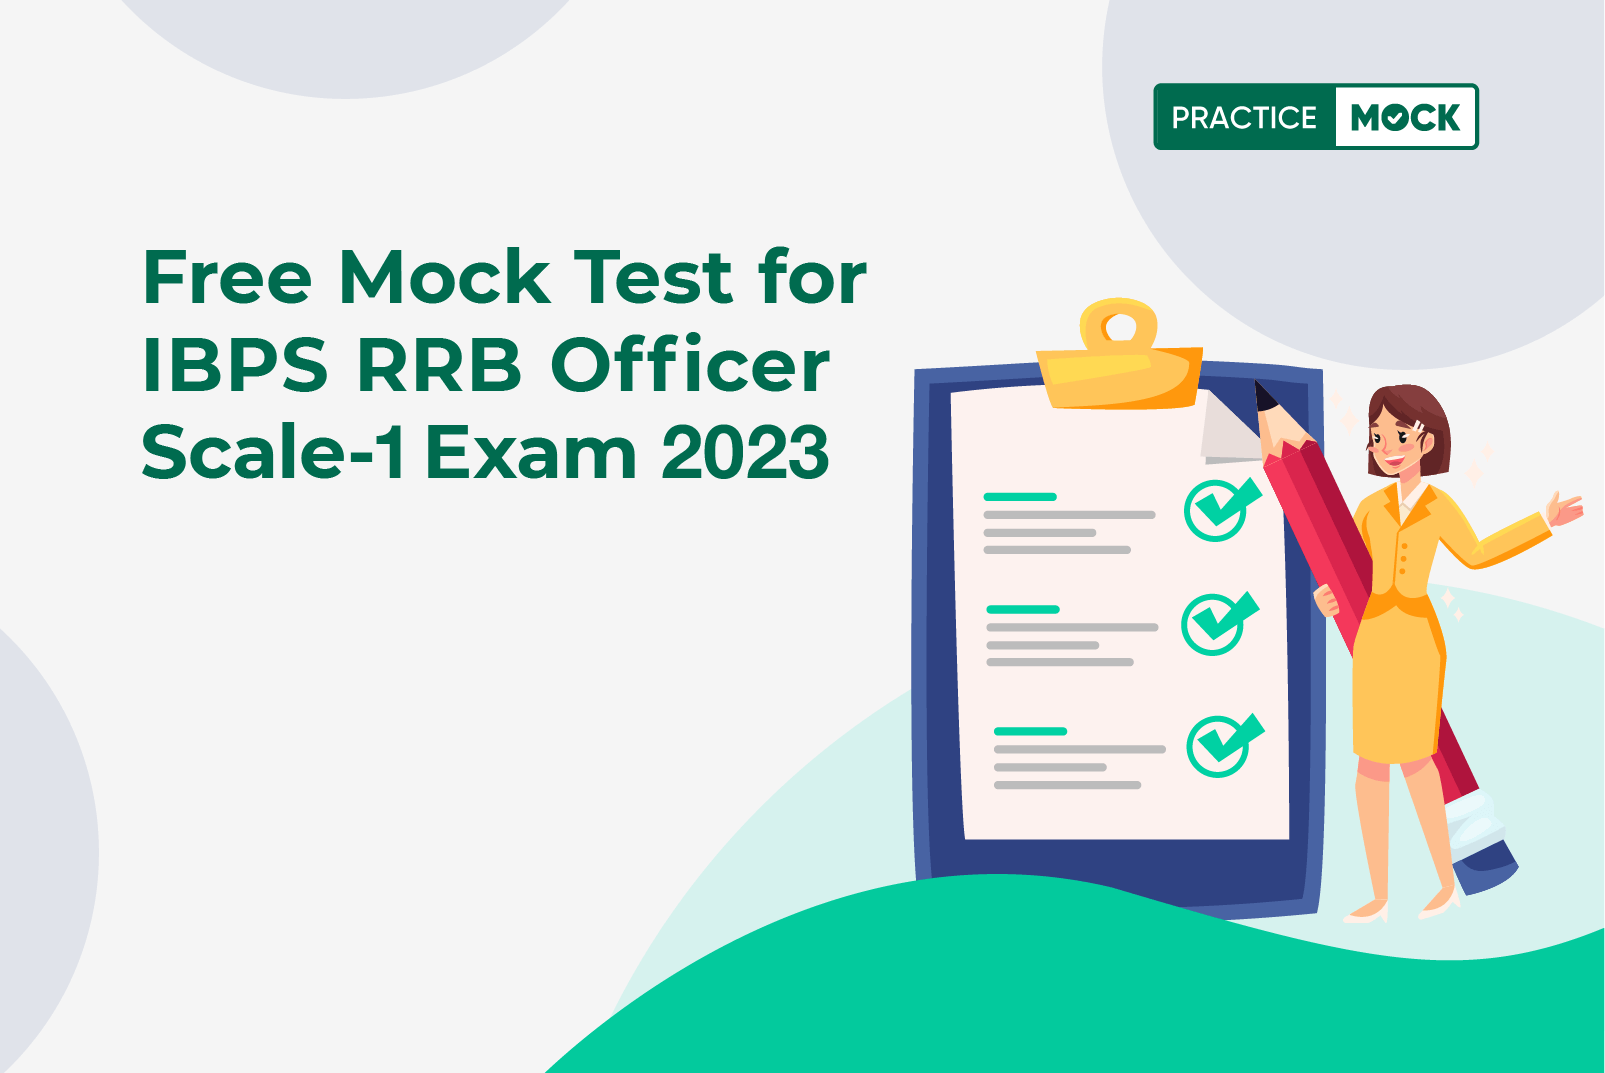 ibps-rrb-po-2023-free-mock-test-for-success-practicemock